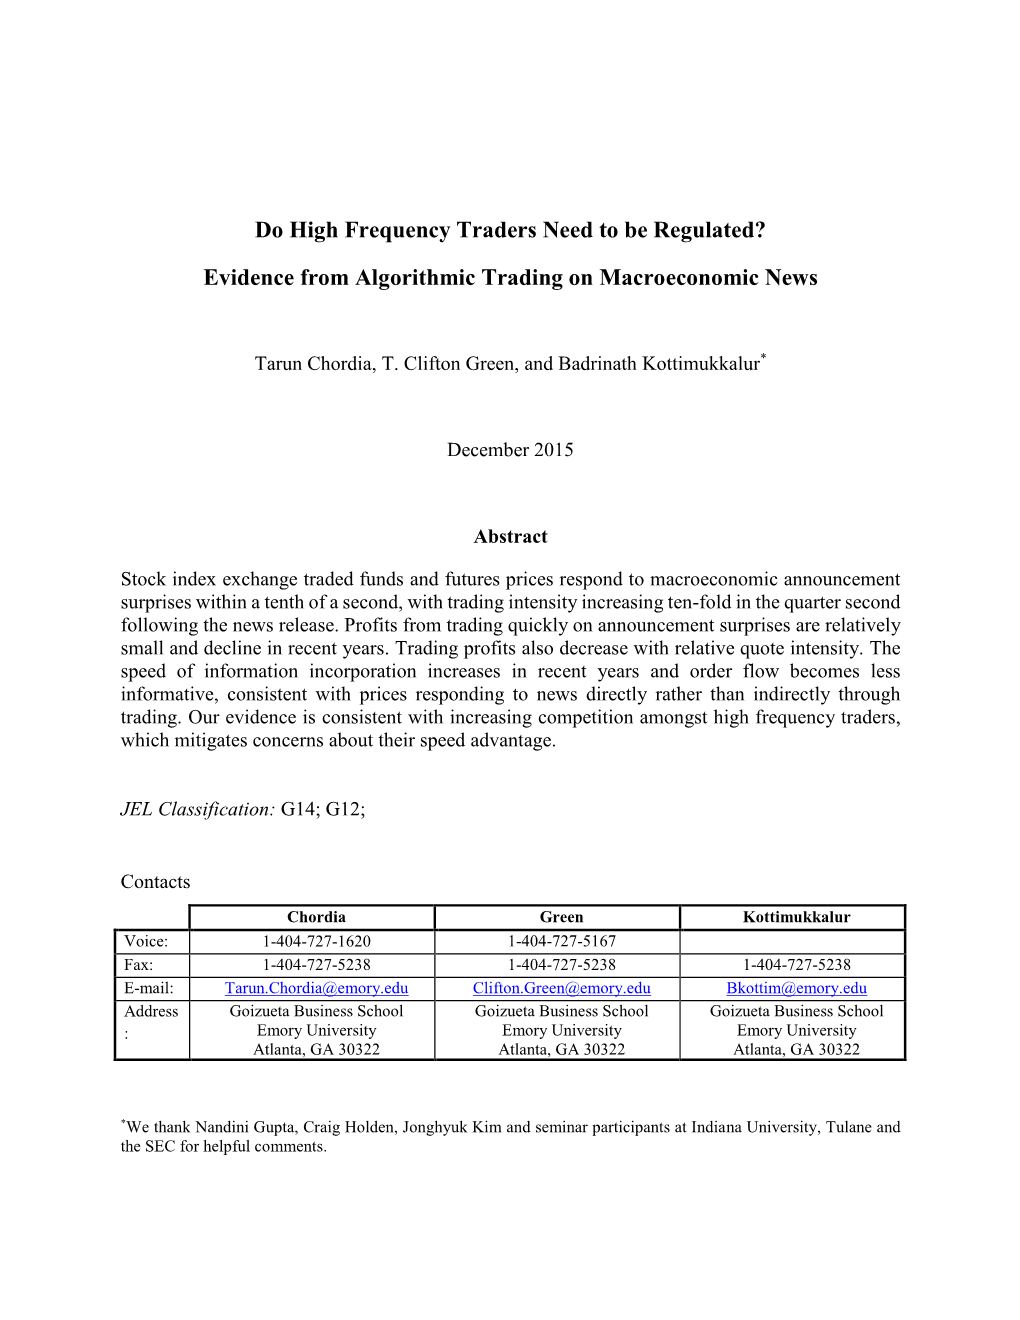 Do High Frequency Traders Need to Be Regulated? Evidence from Algorithmic Trading on Macroeconomic News